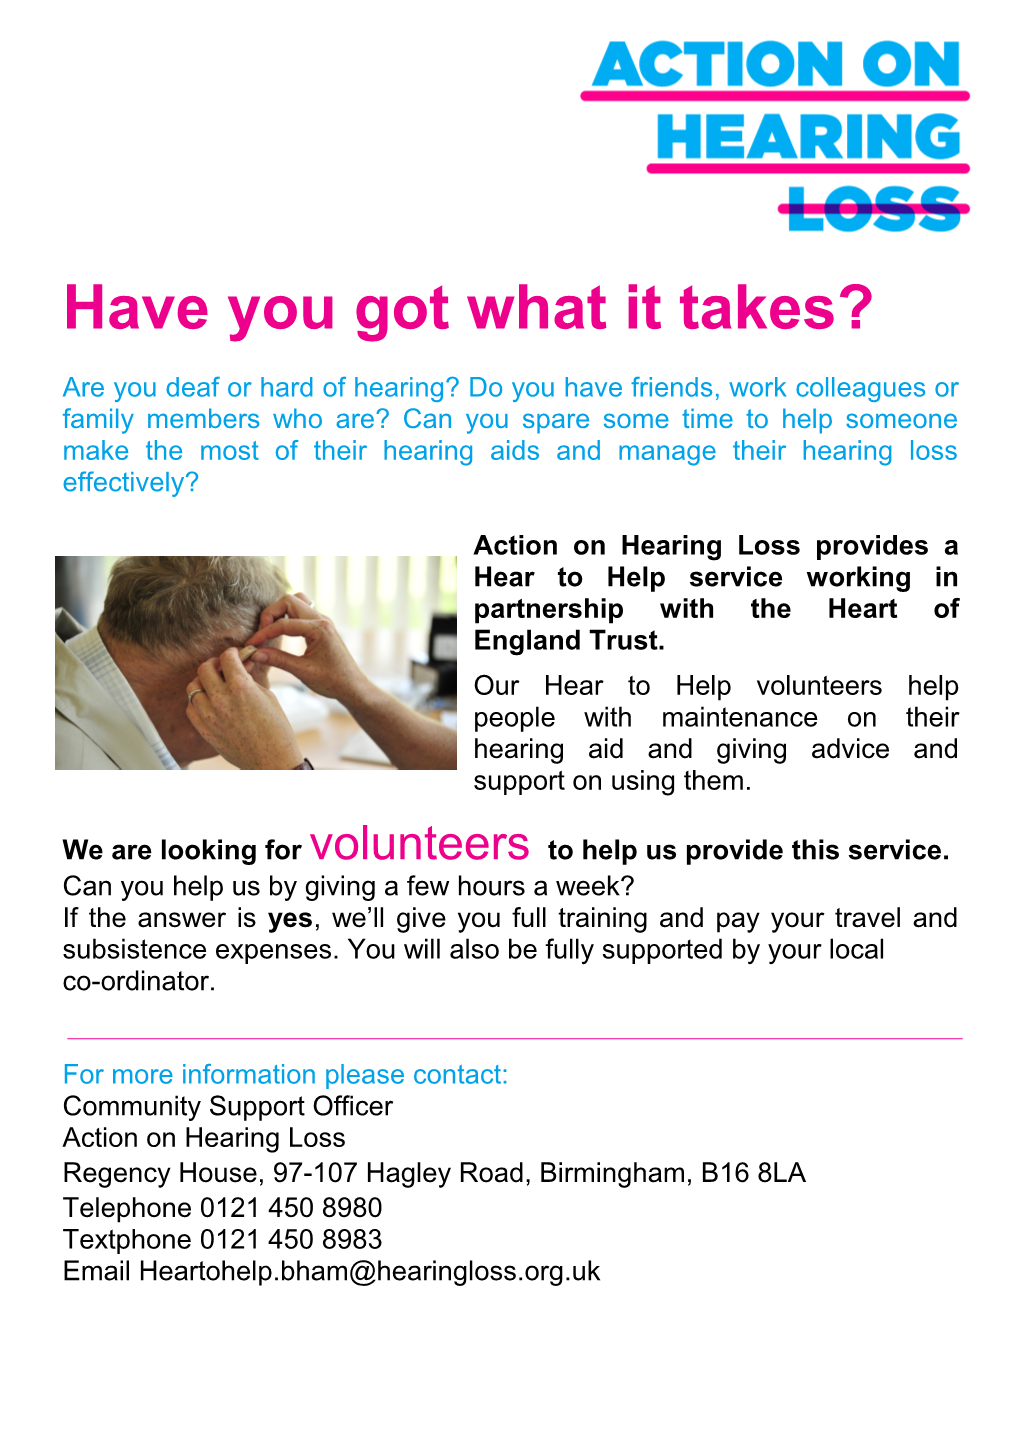 Do You Wear a NHS Hearing Aid Supplied by Heartlands Hospital